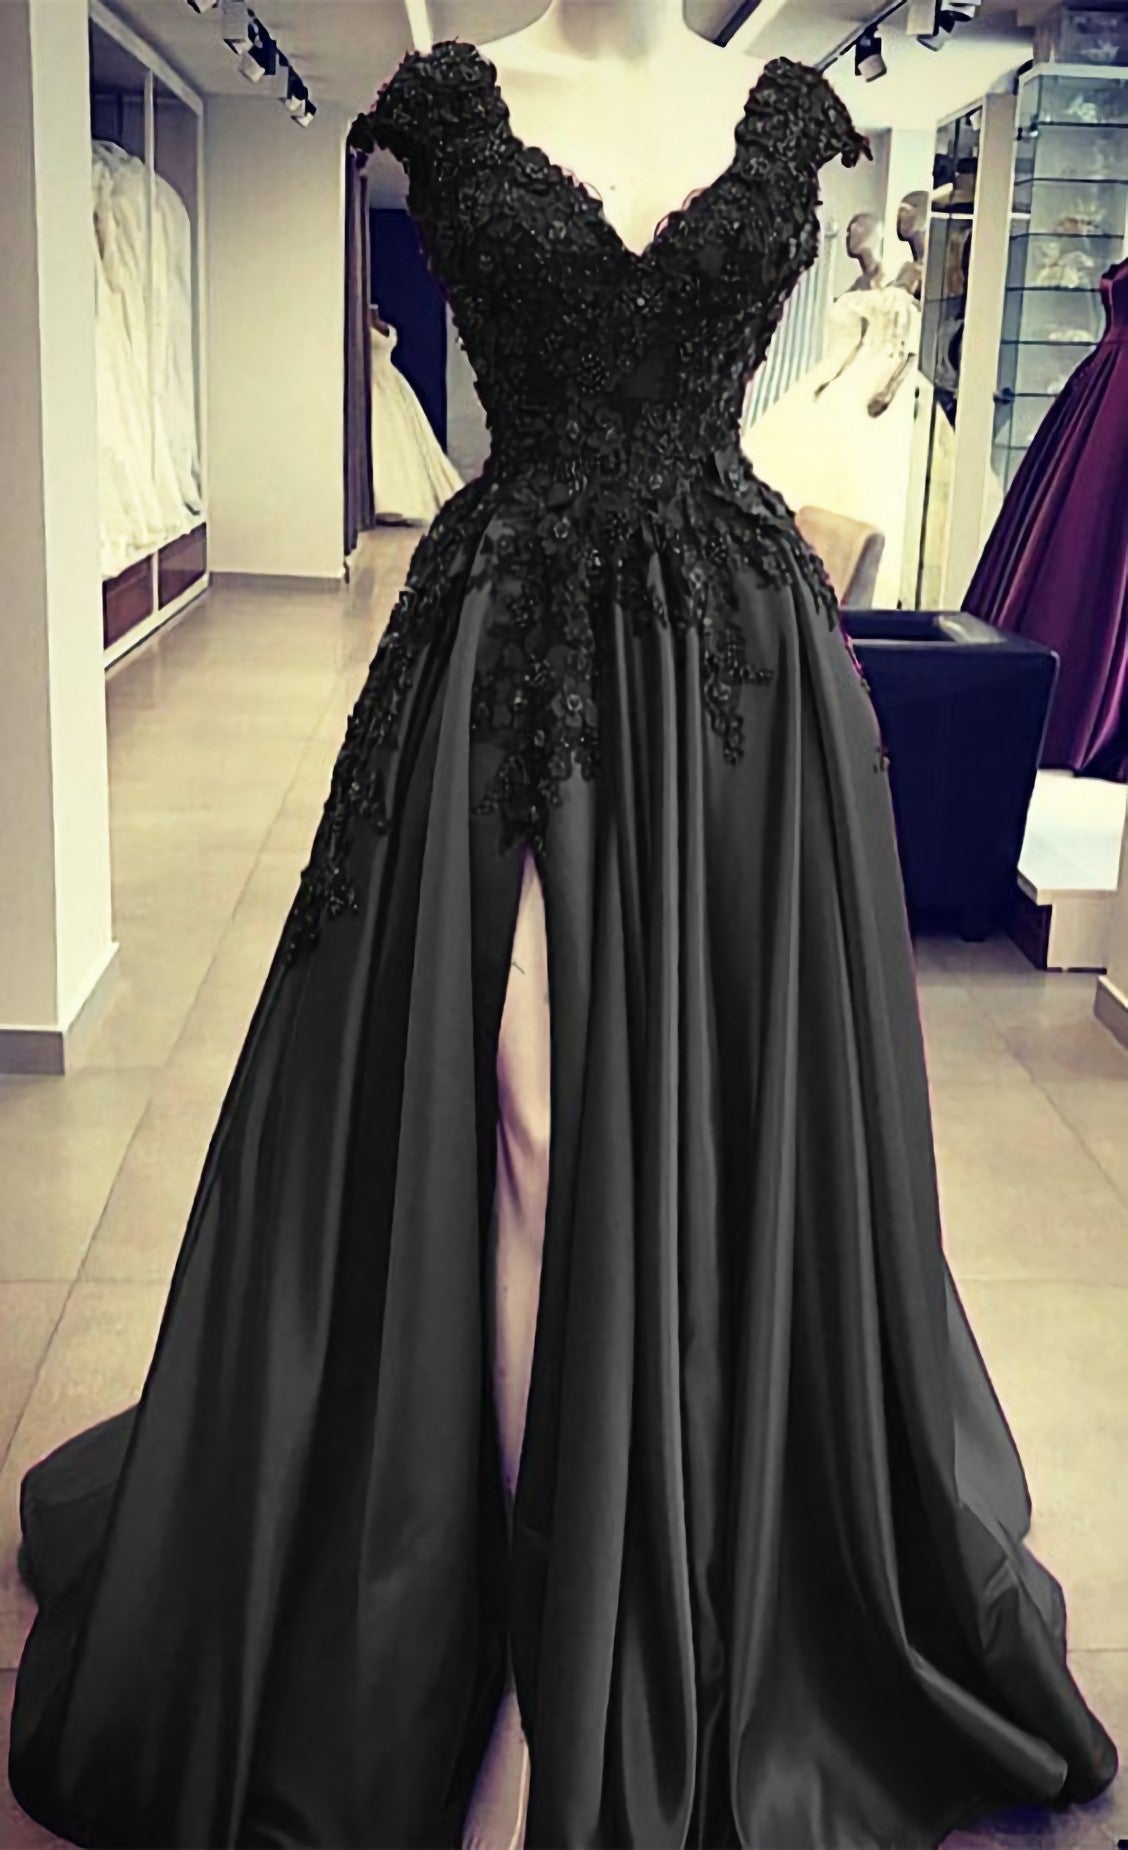 Black Satin Slit Dresses, With Lace Embroidery Prom Dresses